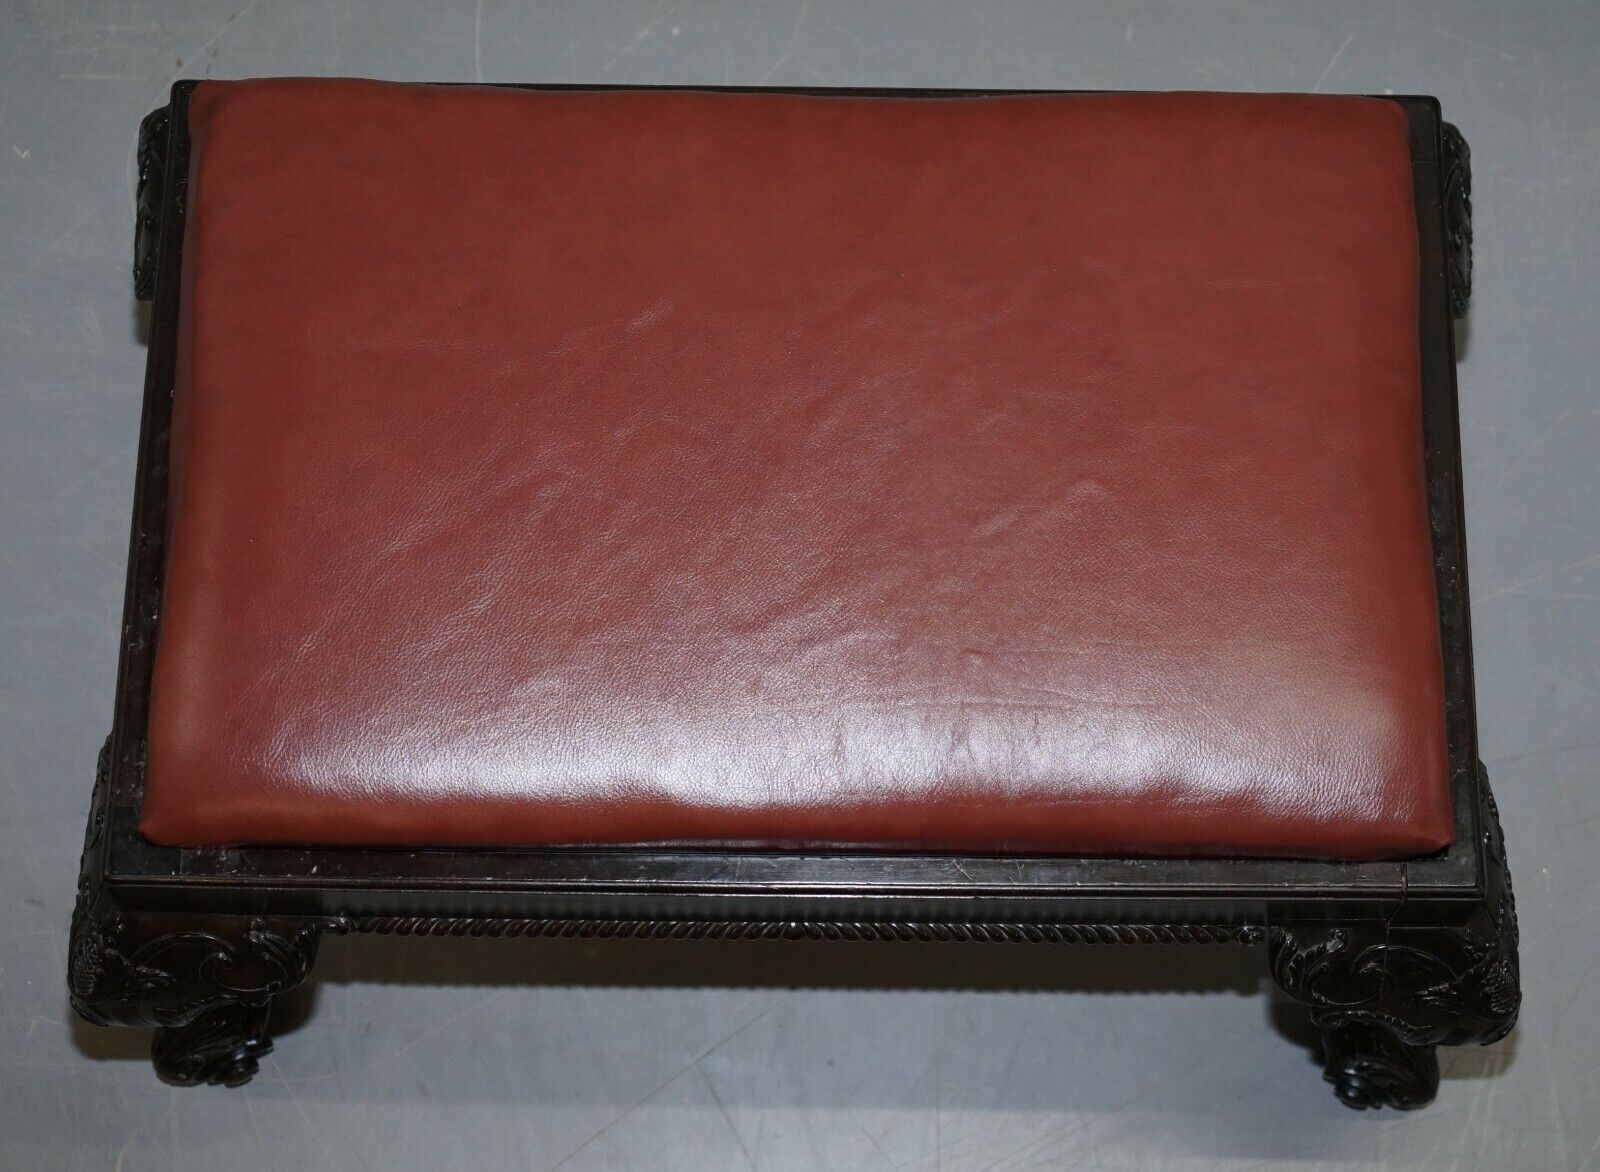 https://royalhouseantiques.co.uk/wp-content/uploads/imported/2/ANTIQUE-HAND-CARVED-ENGLISH-GEORGIAN-CLAW-BALL-FEET-FOOTSTOOL-BROWN-LEATHER-185372980372-4.jpg